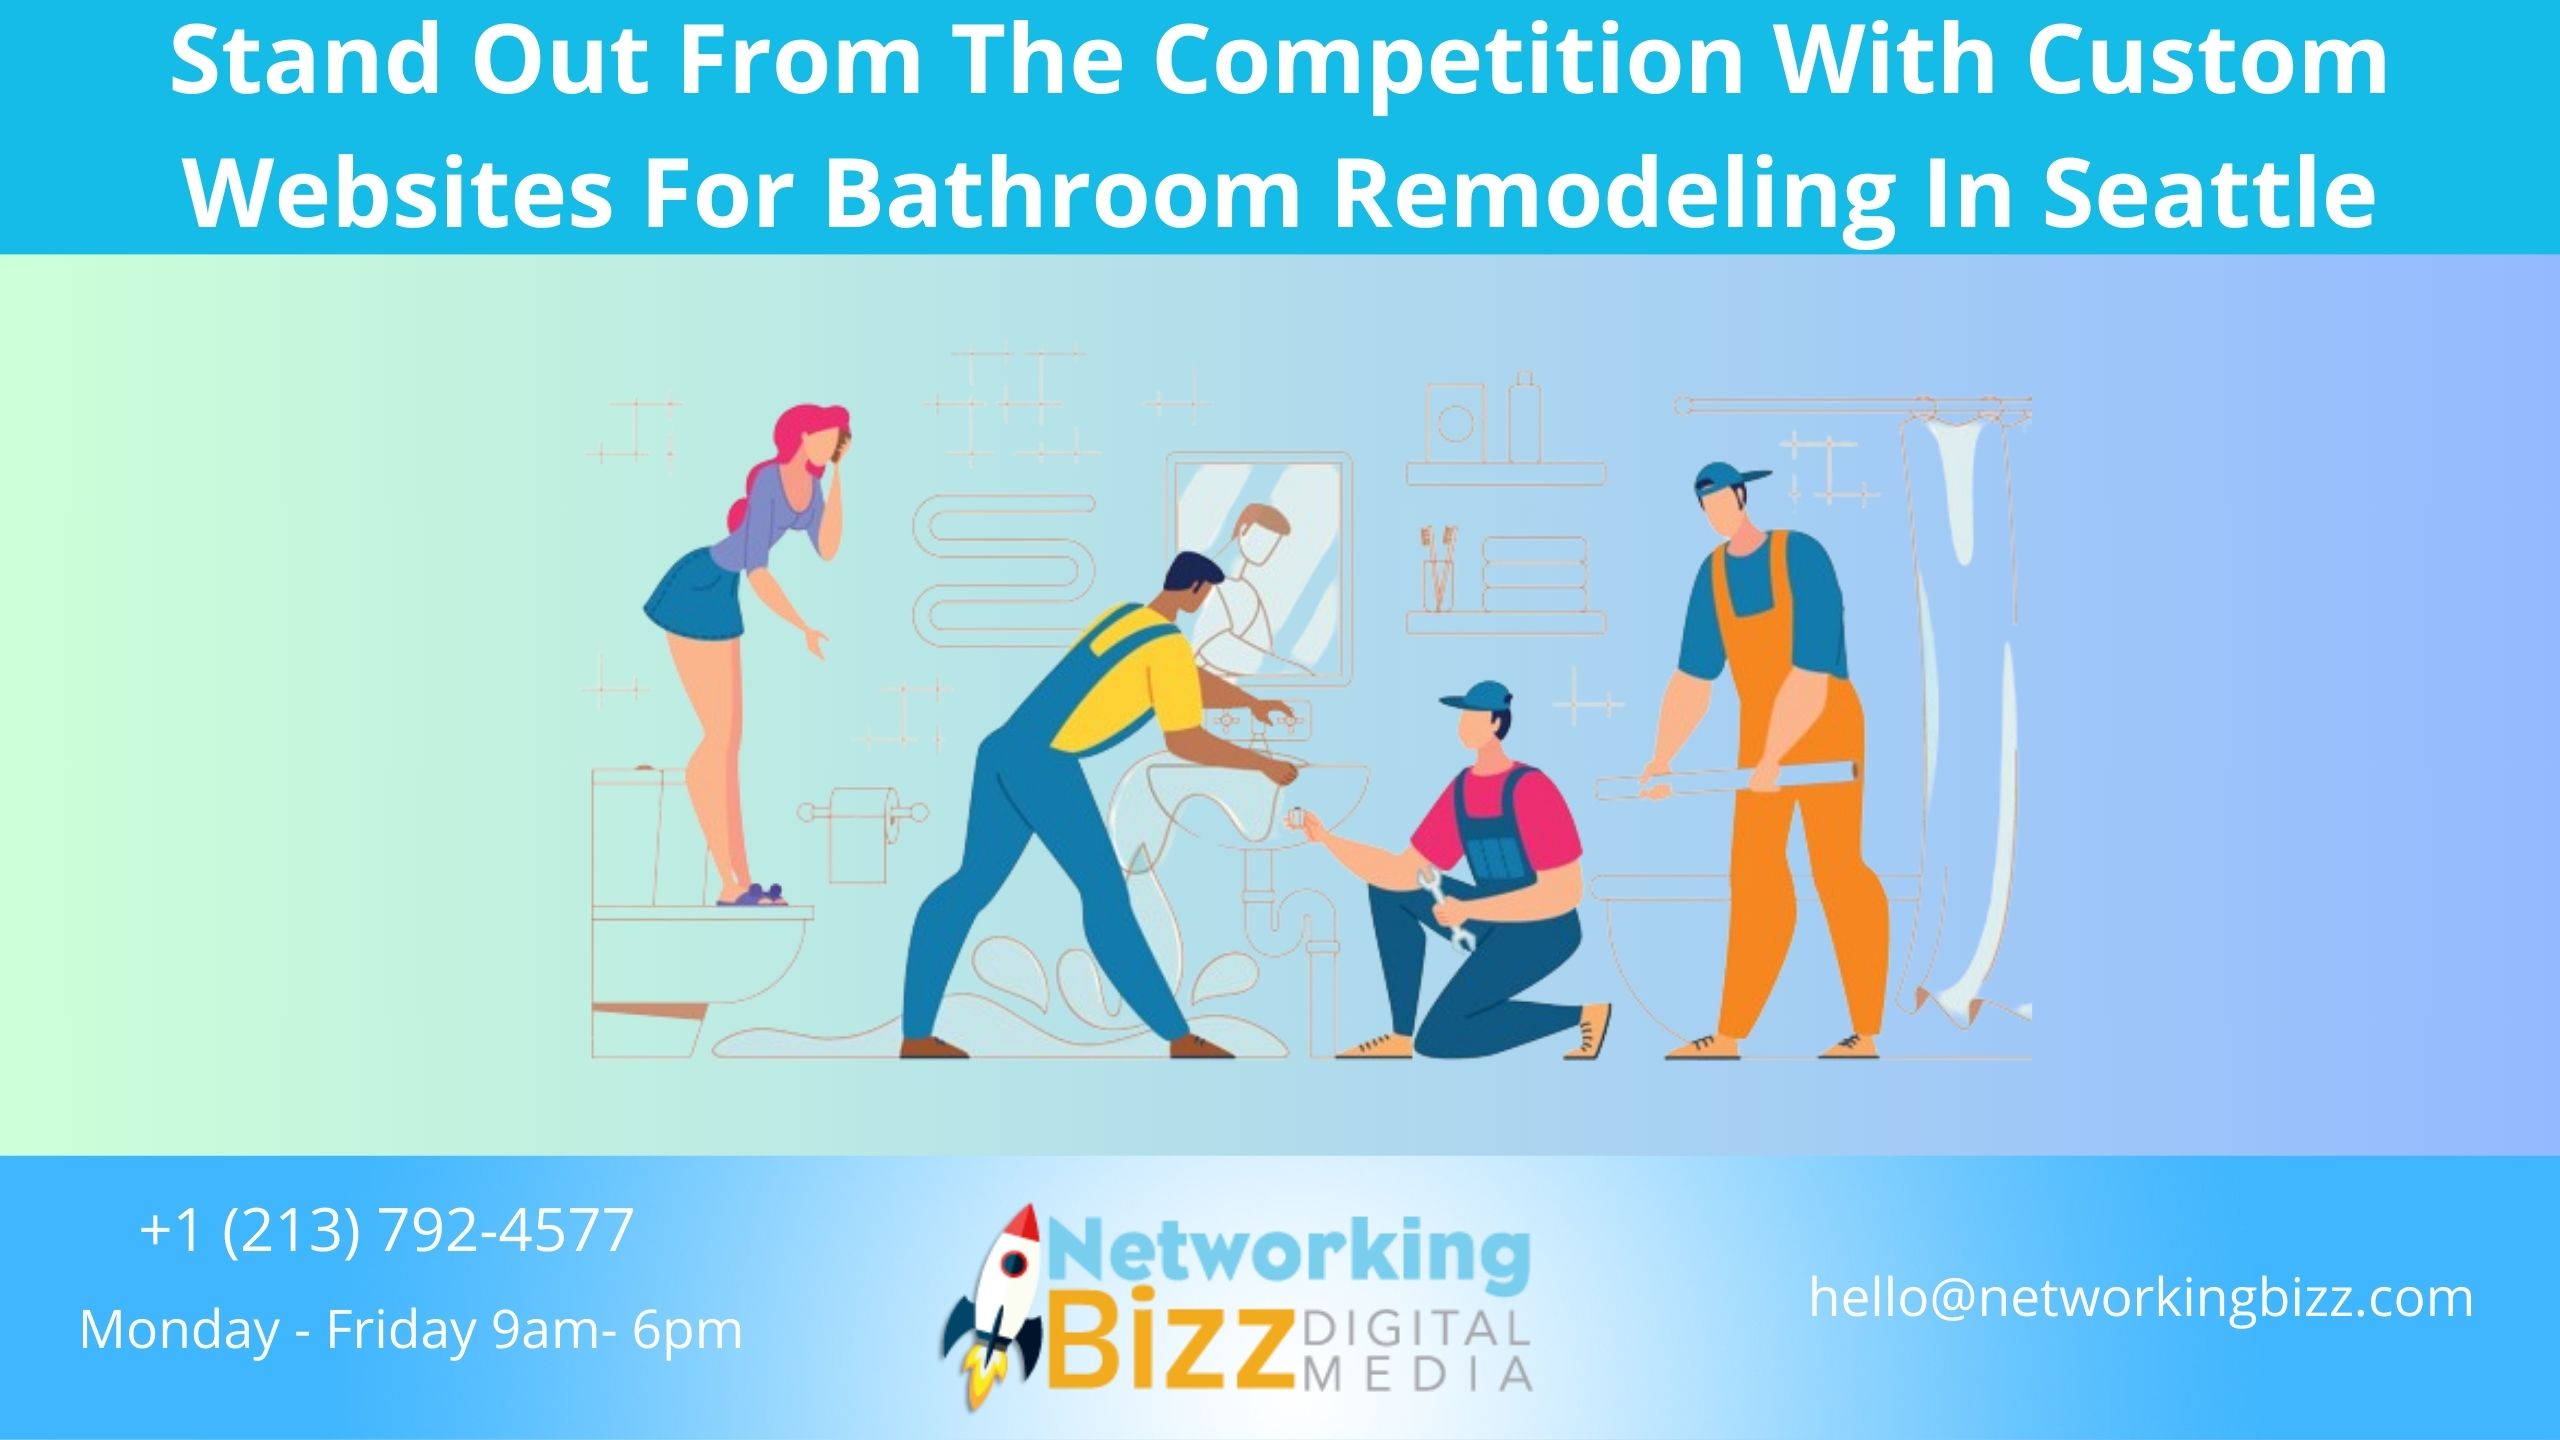 Stand Out From The Competition With Custom Websites For Bathroom Remodeling In Seattle